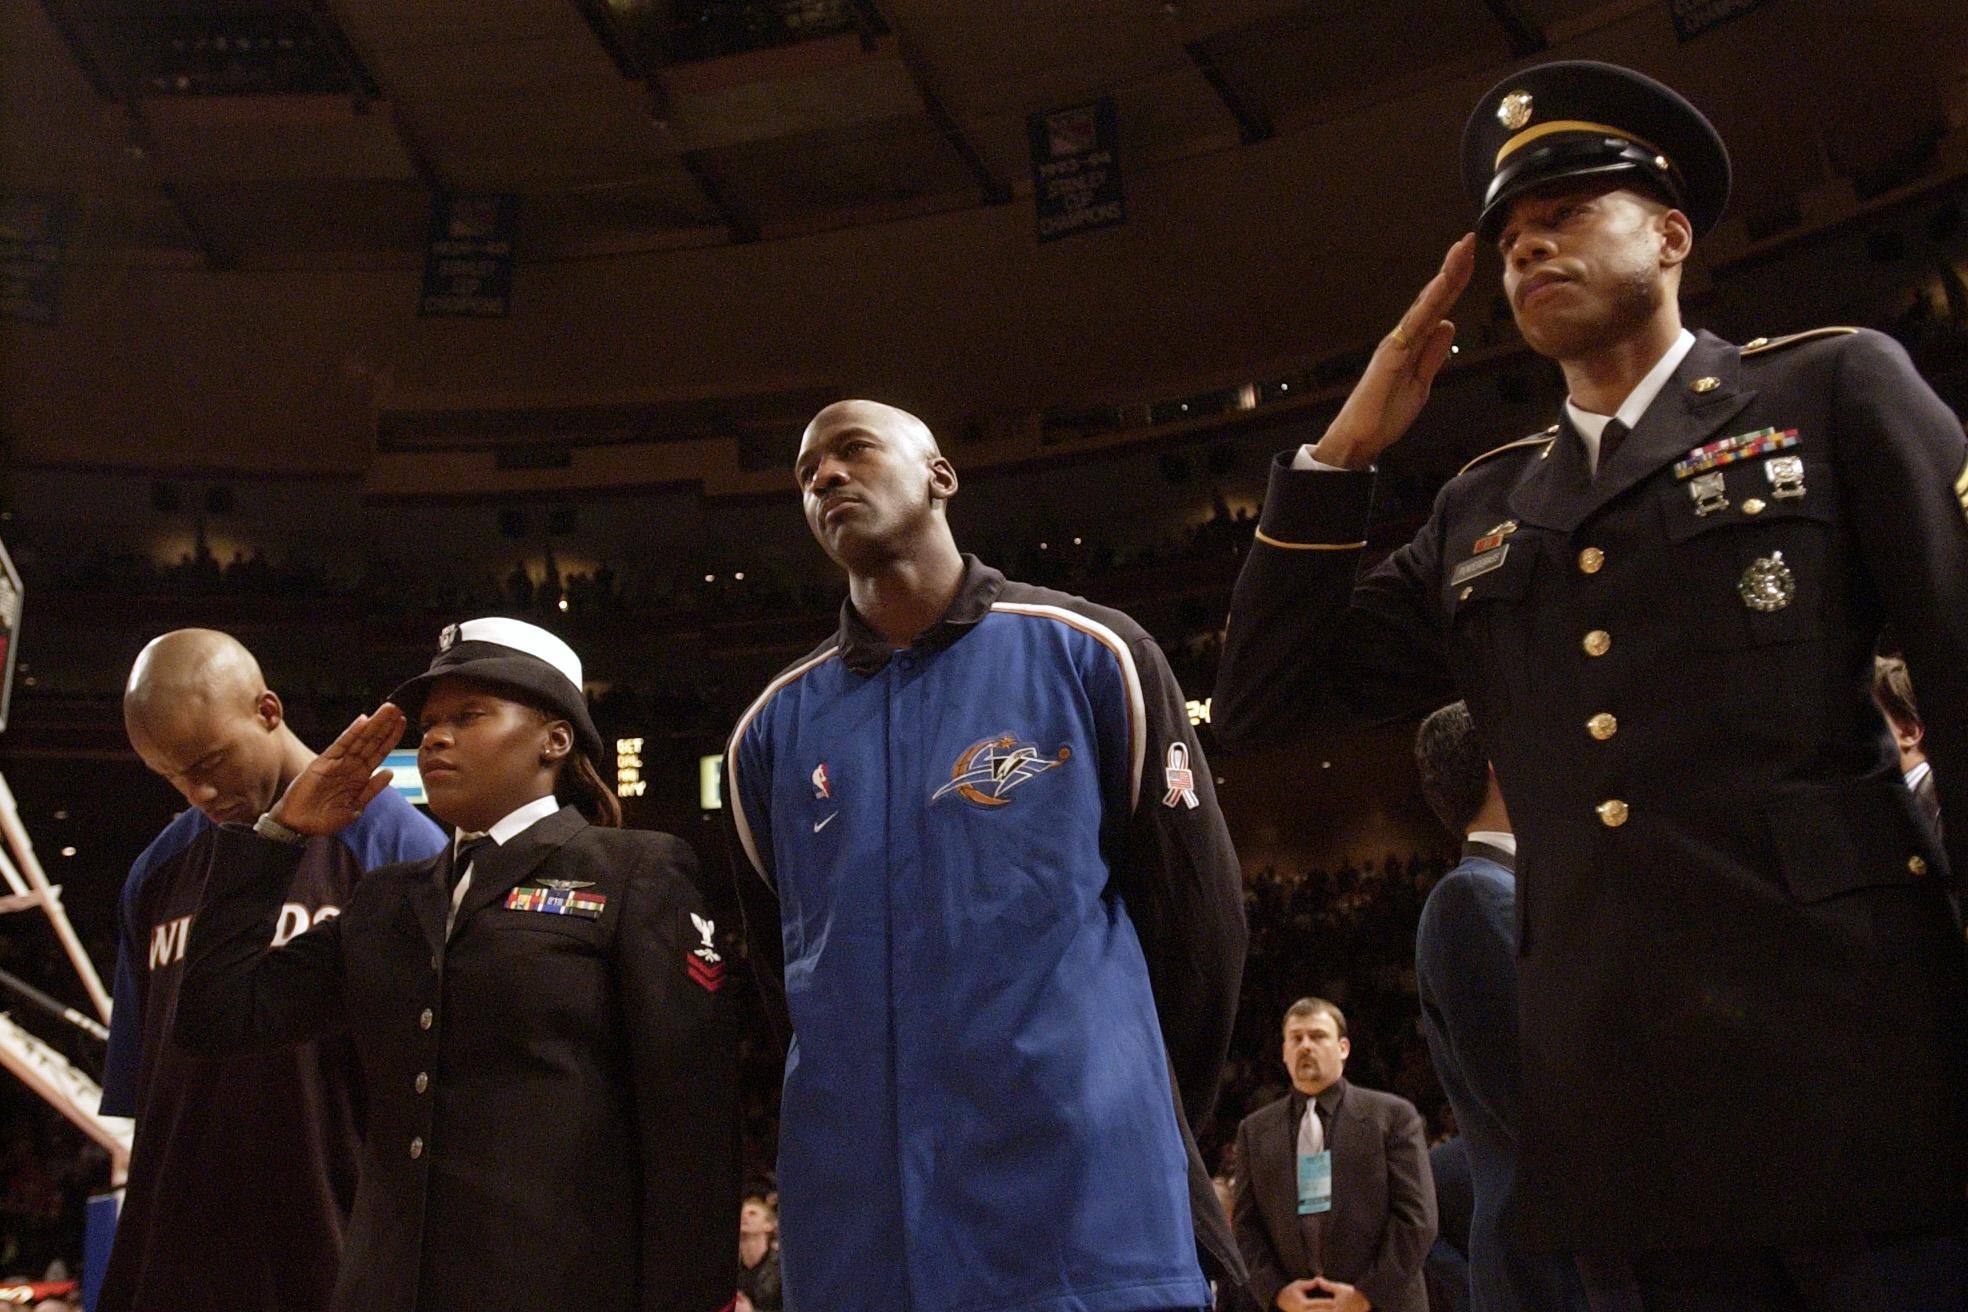 Michael Jordan stands between two members of the military during the national anthem.